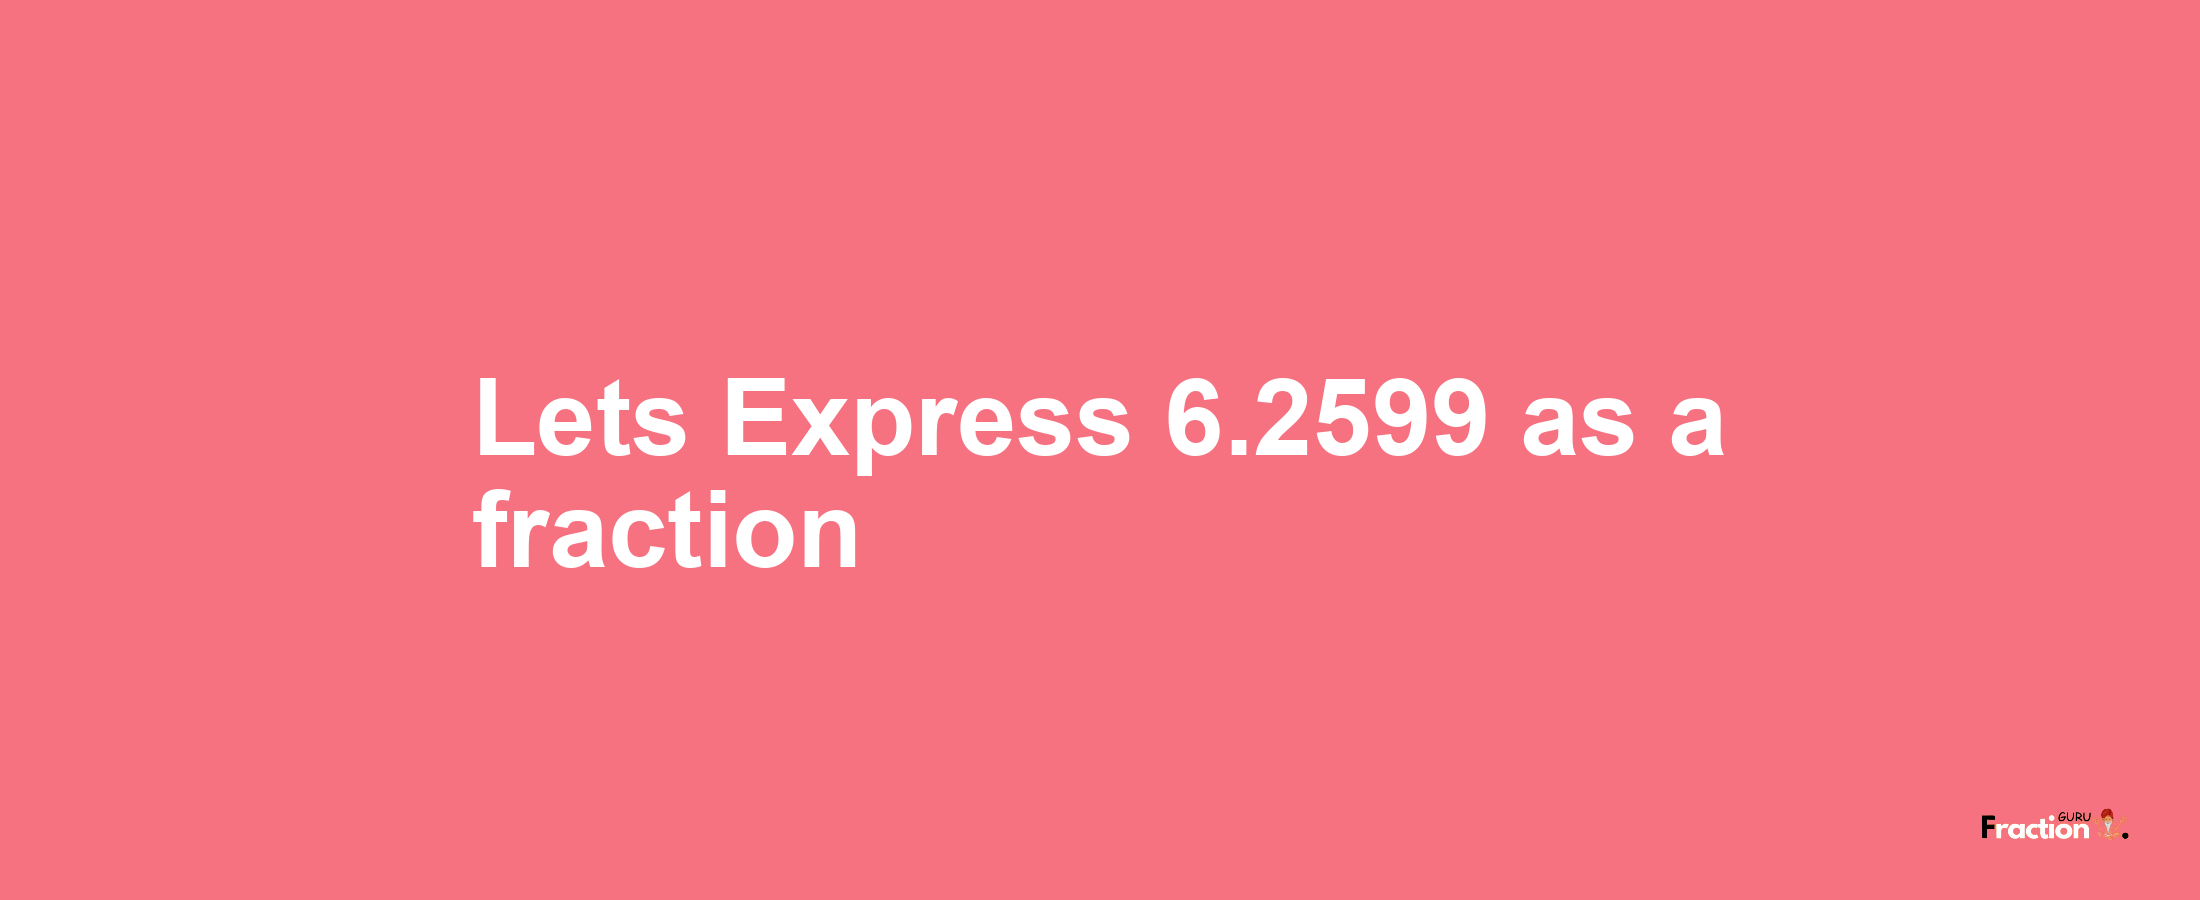 Lets Express 6.2599 as afraction